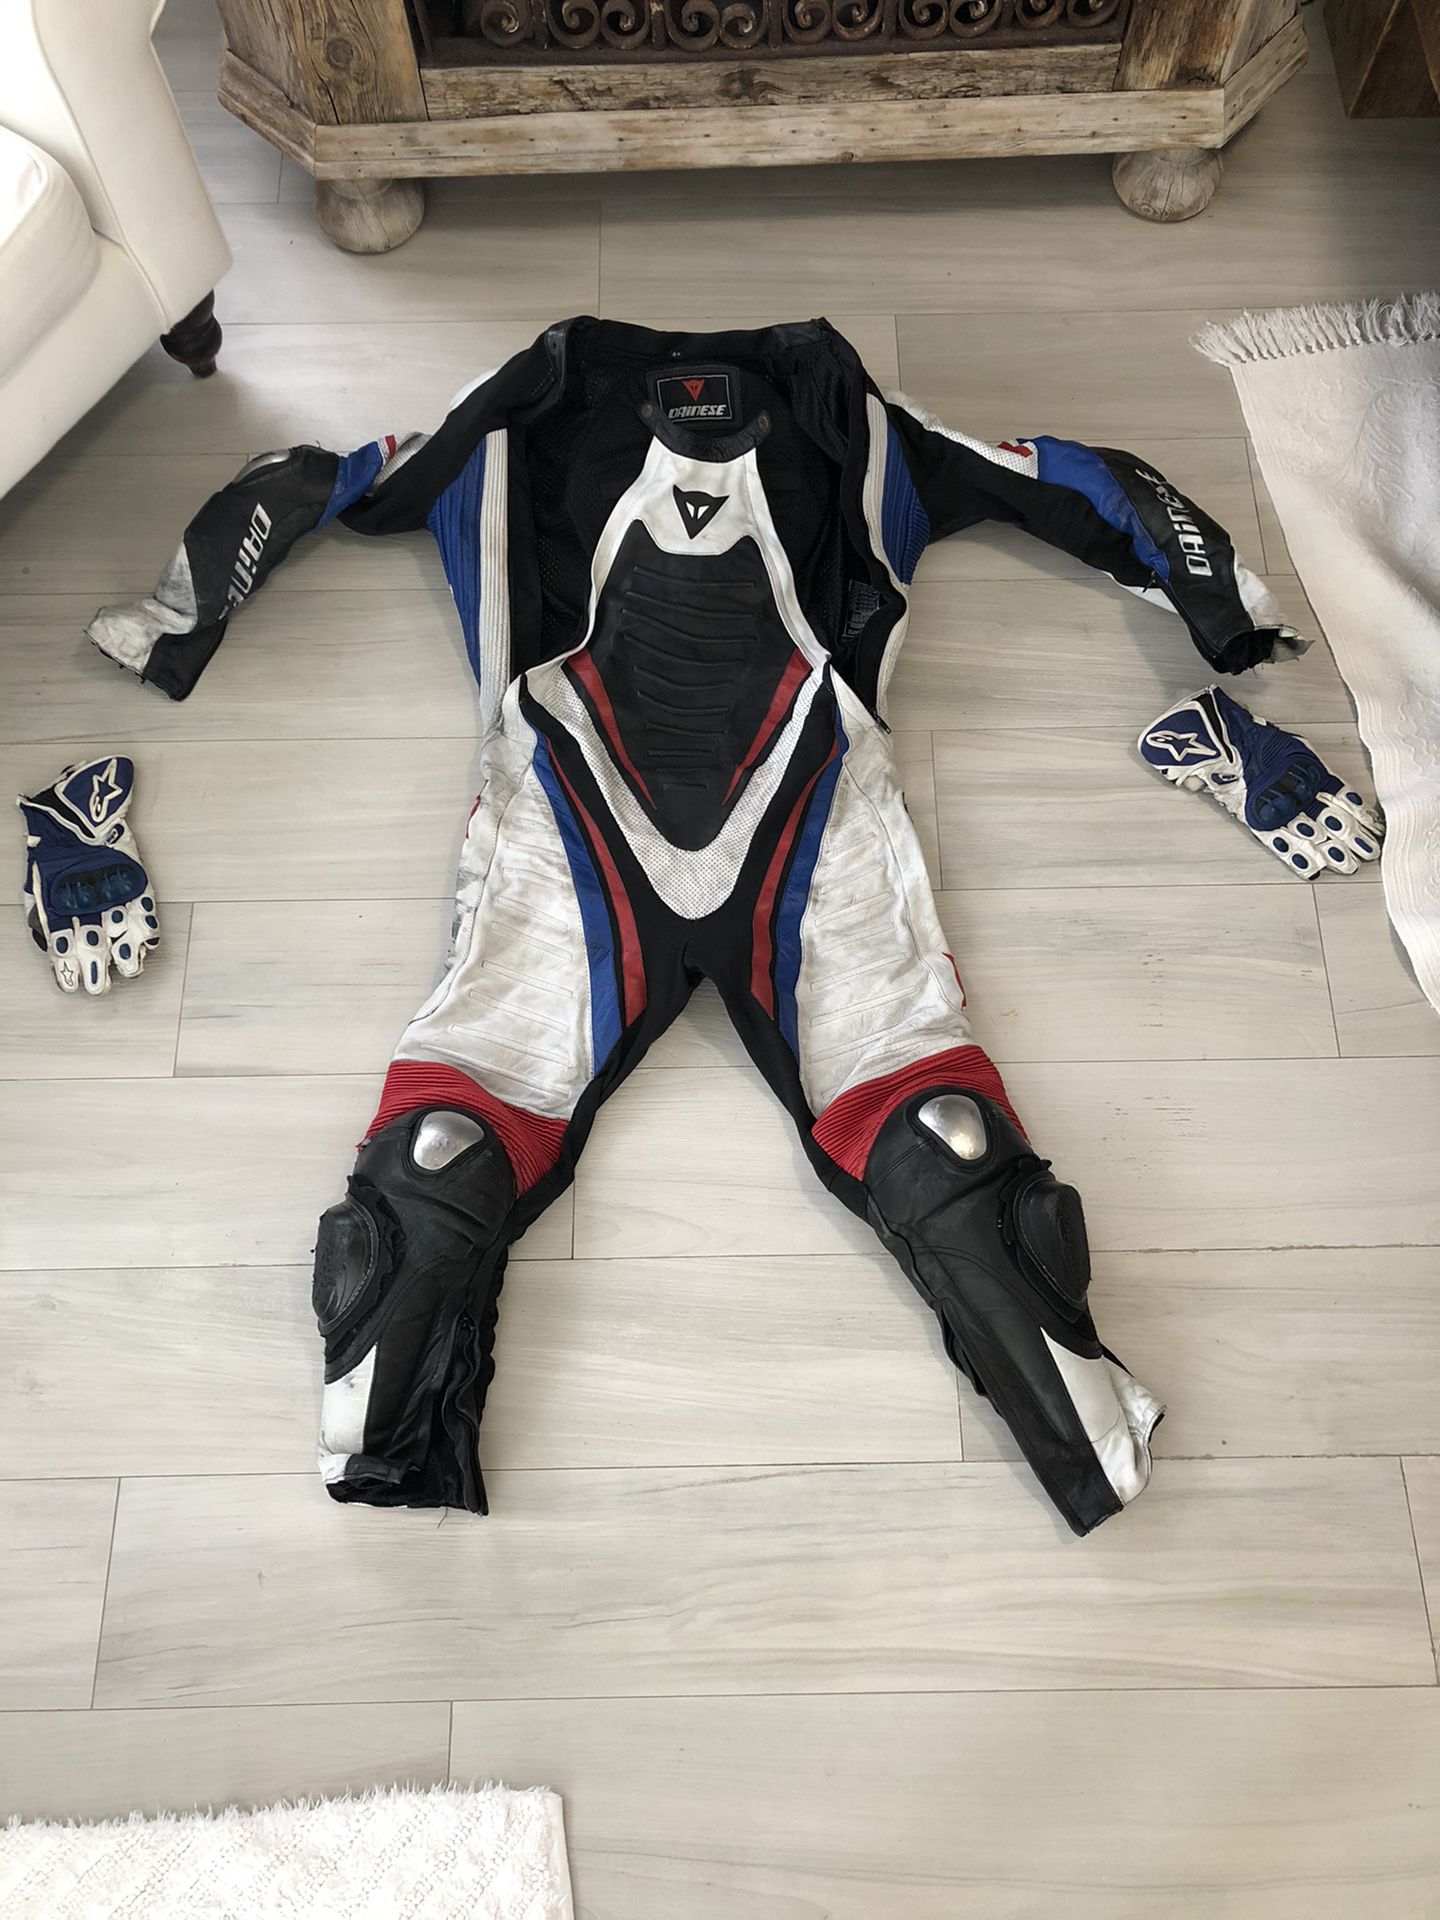 Dainese motorcycle suit